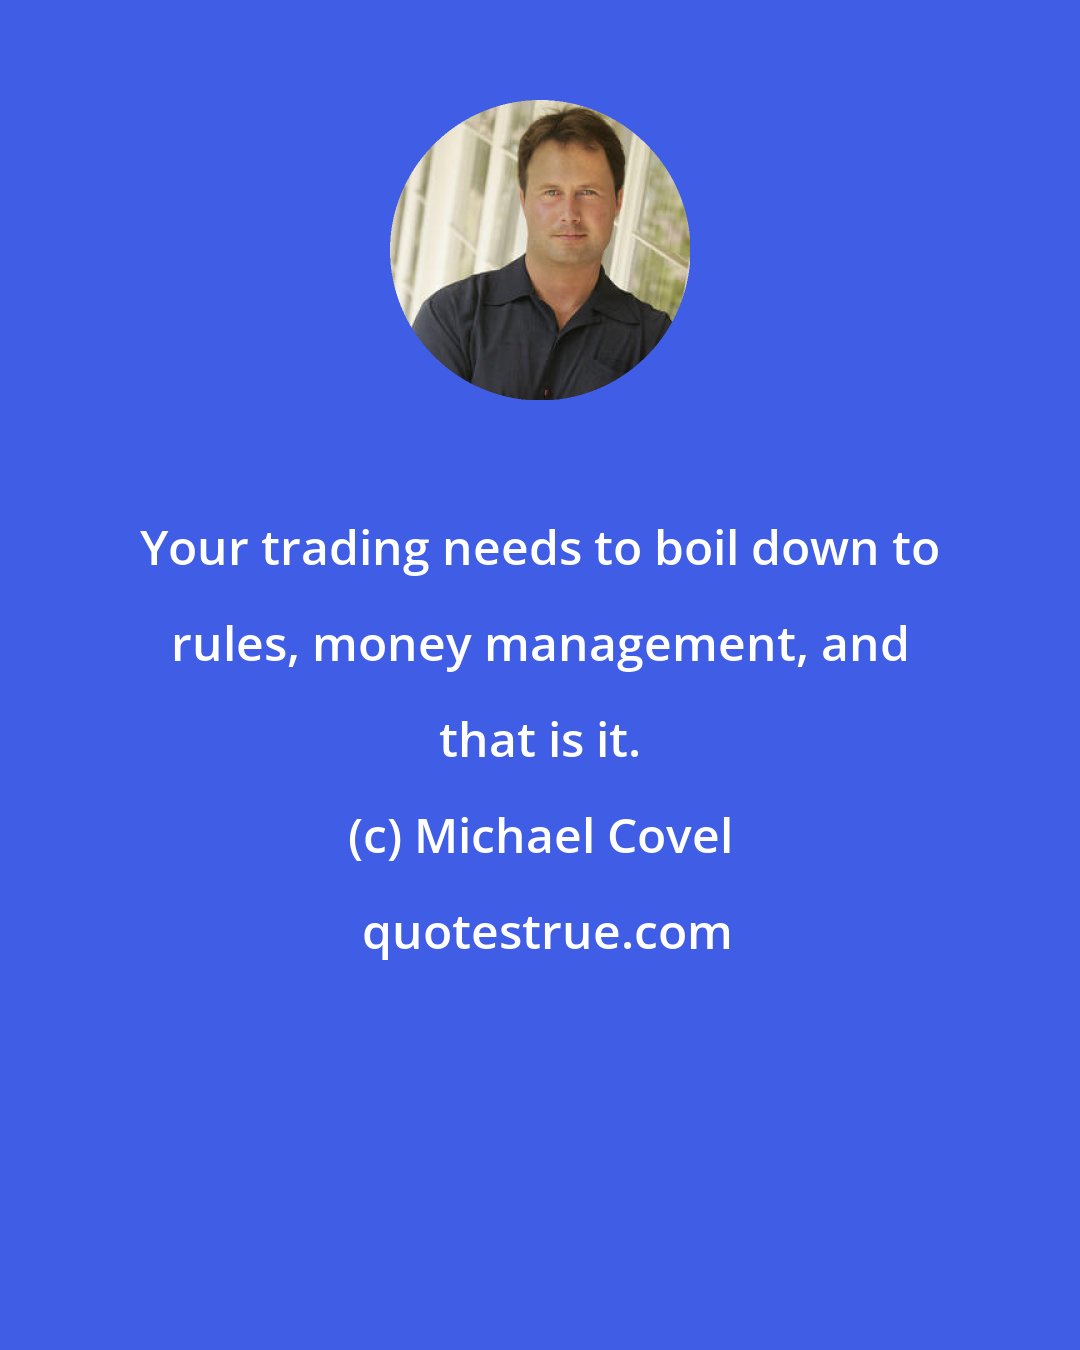 Michael Covel: Your trading needs to boil down to rules, money management, and that is it.